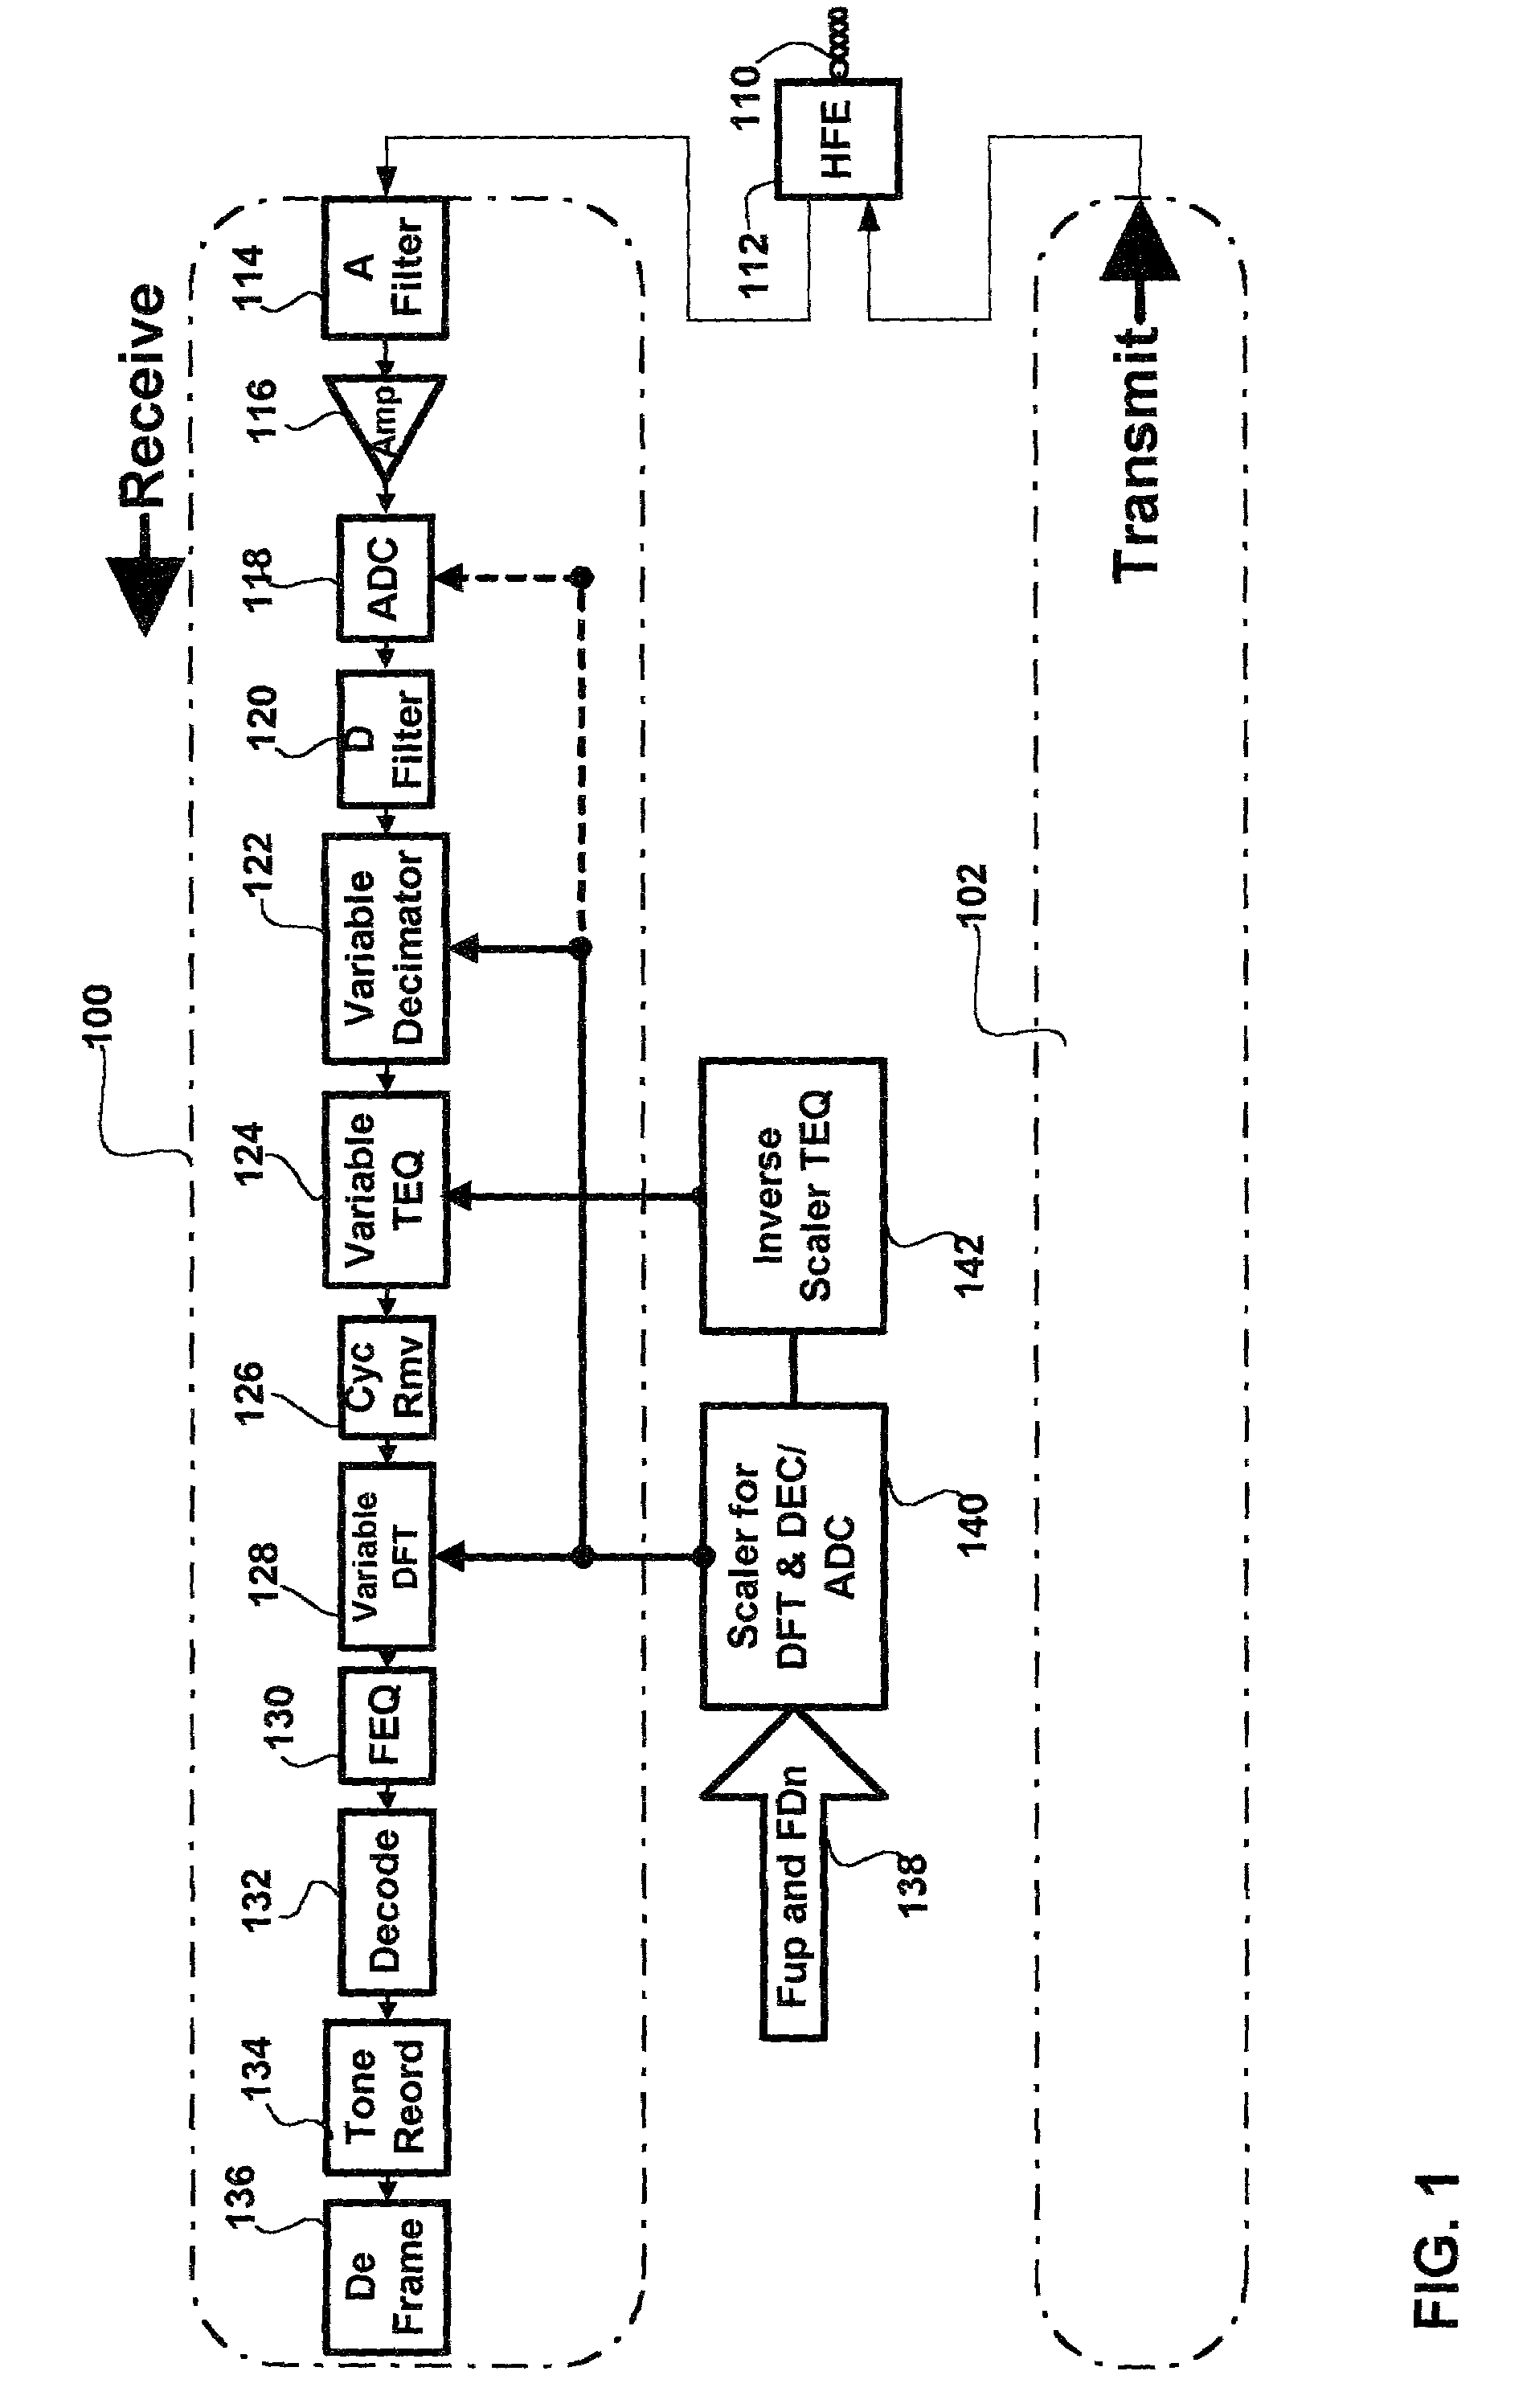 Method and apparatus for time domain equalization in an XDSL modem